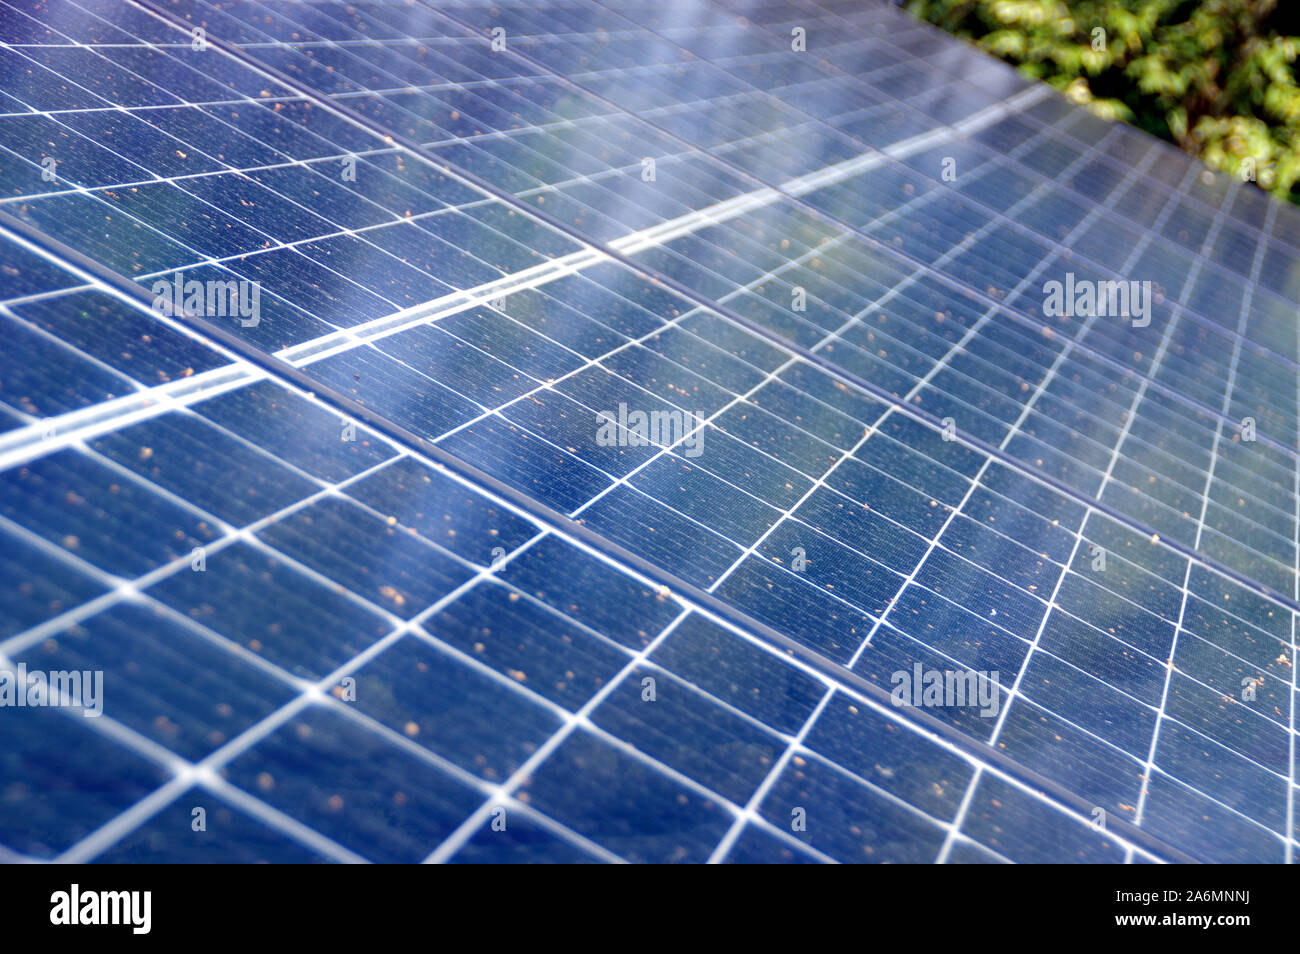 Photovoltaic panels on house roof. Alternative and renewable energy, green power, ecology and solar electricity production. Stock Photo